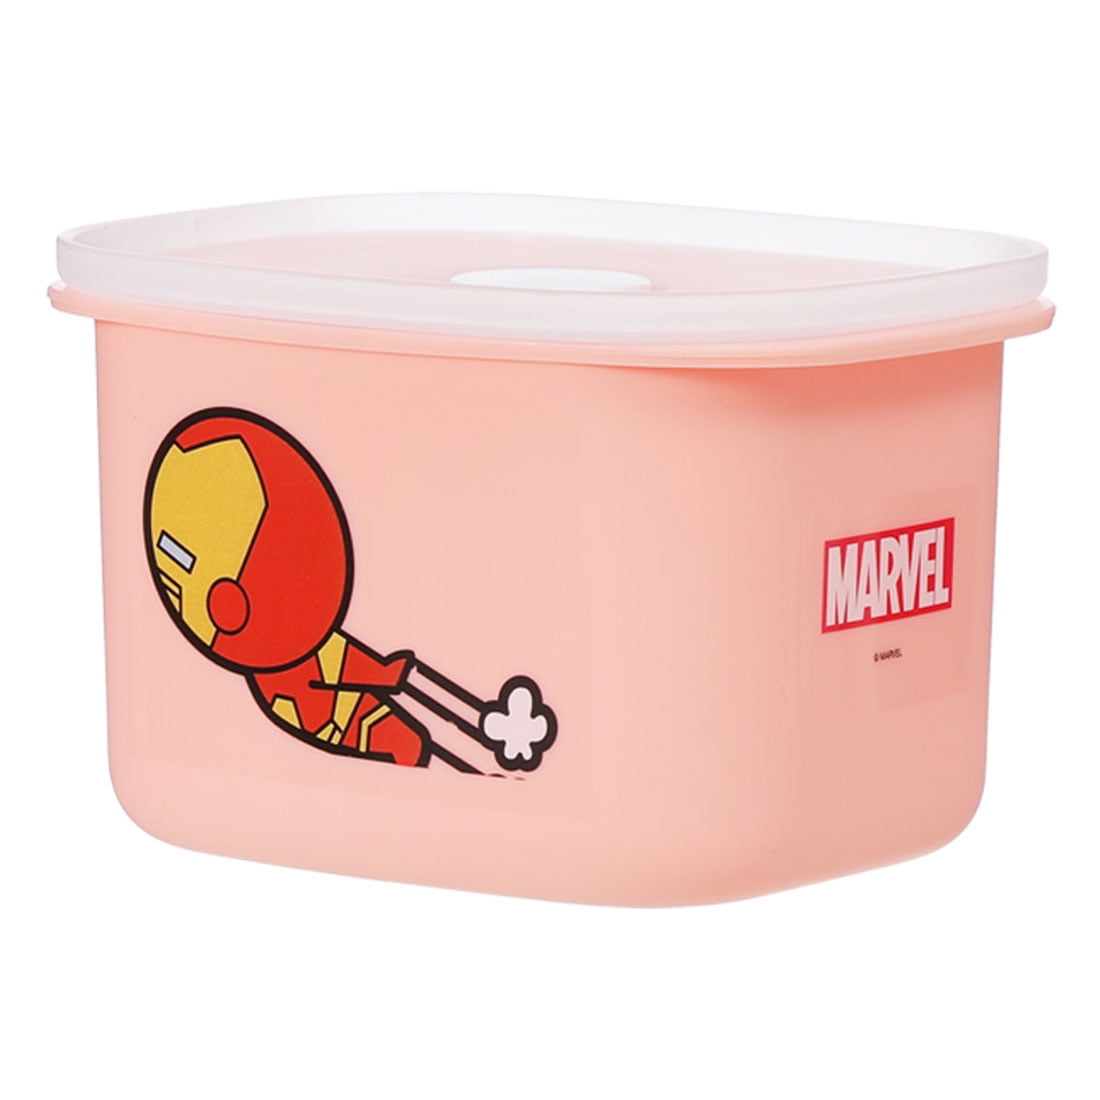 MINISO Marvel Bento Box, Lunch Box Double-layer Contanier Glass BPA Free  for Kids Student School Office 12oz, Captain America 